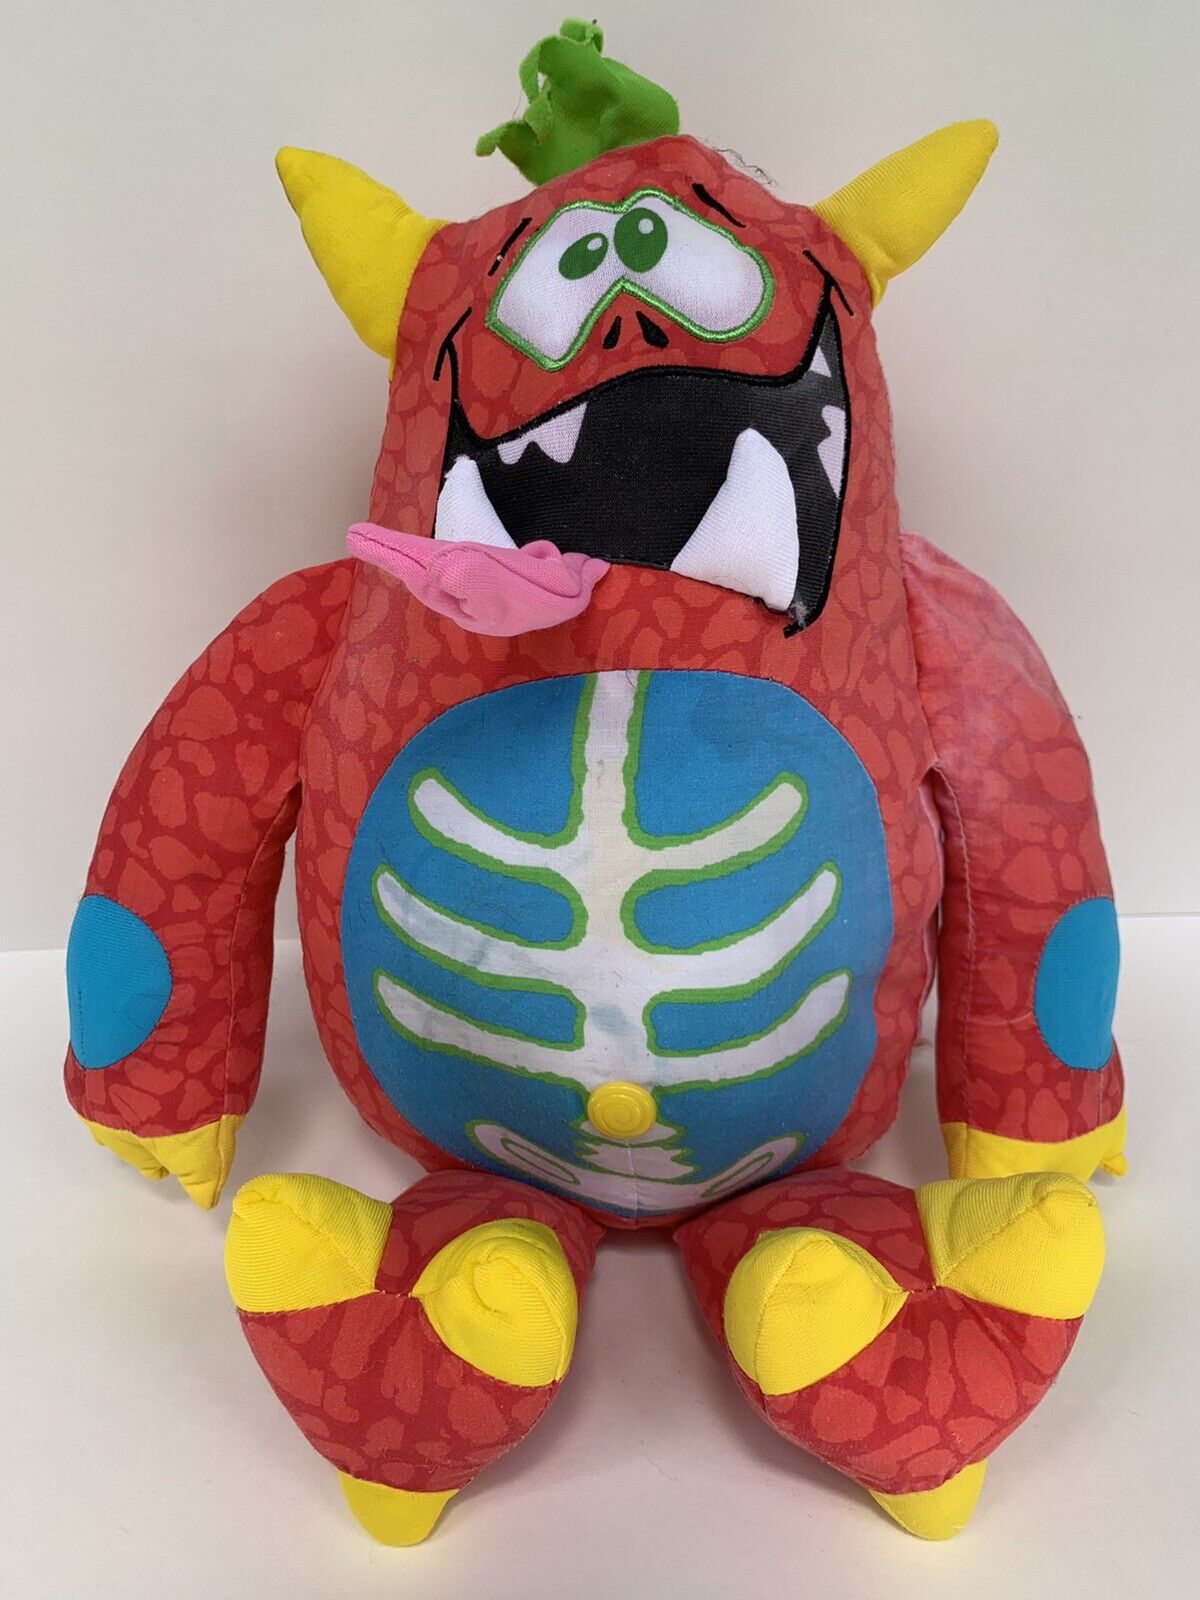 Doodle Monster Red Plush Toy Stuffed Animal Writing Drawing Art No Markers  | eBay